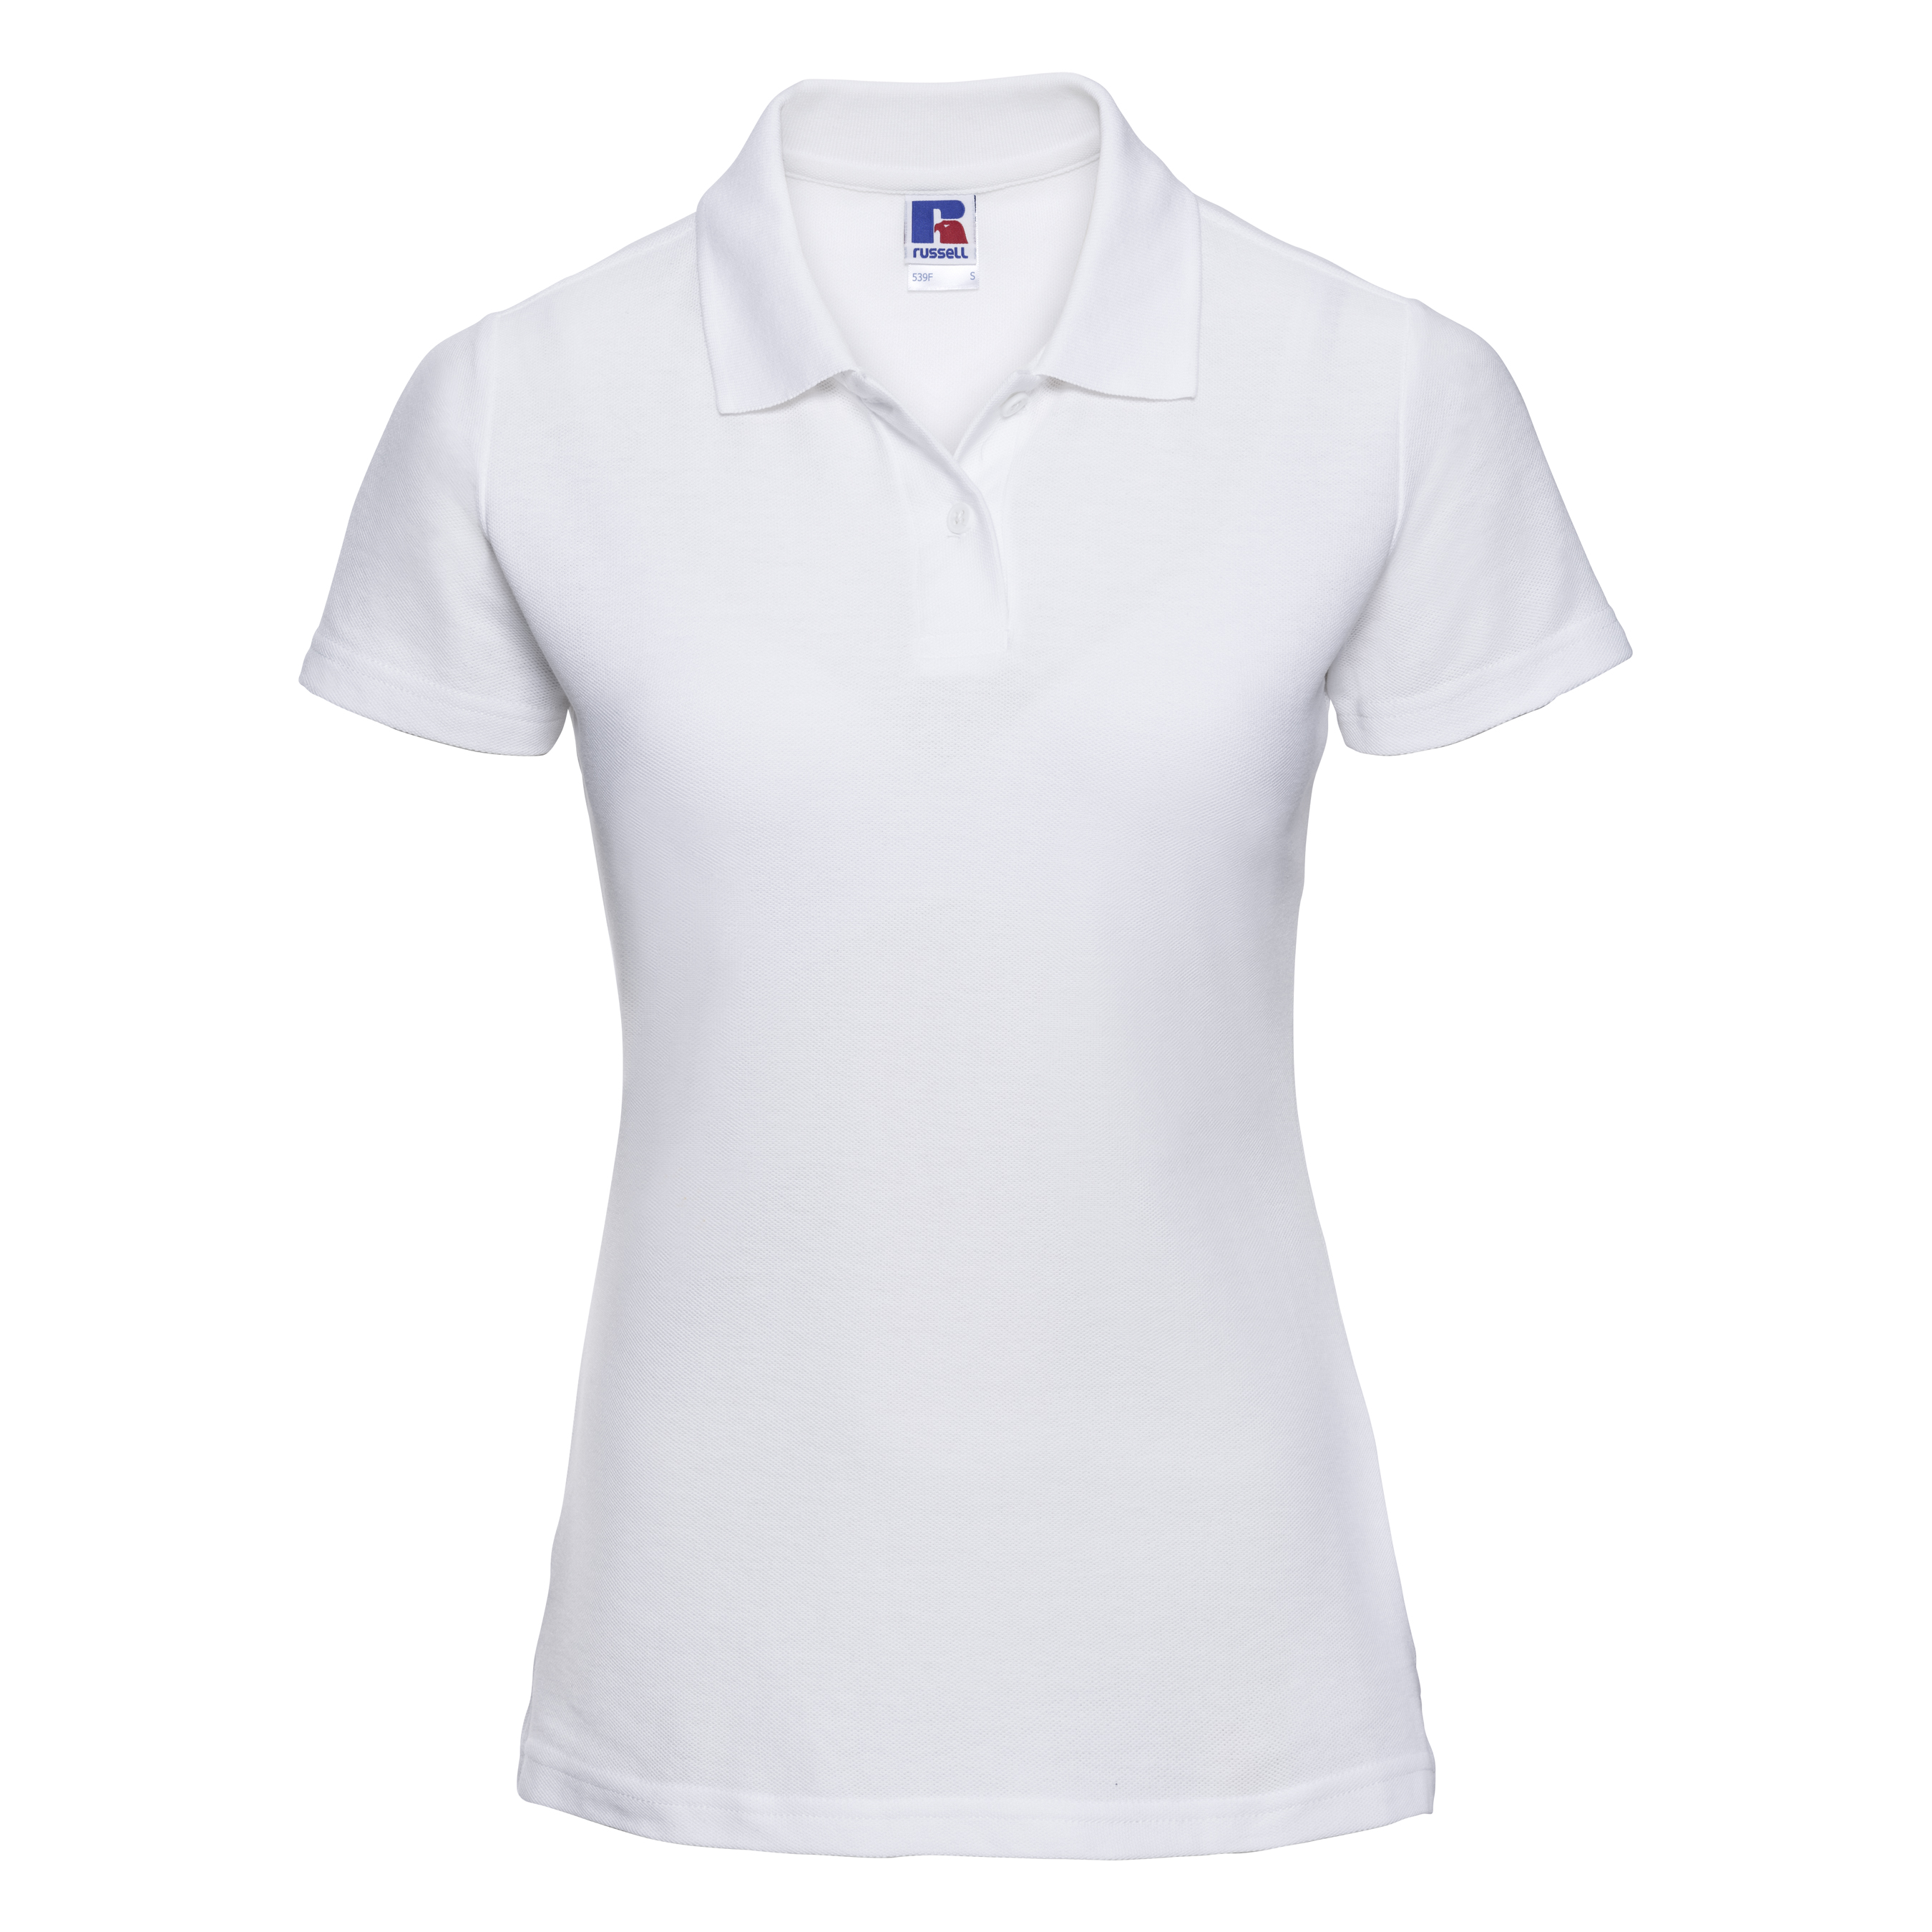 ax-httpswebsystems.s3.amazonaws.comtmp_for_downloadrussell-womens-polycotton-white.jpg